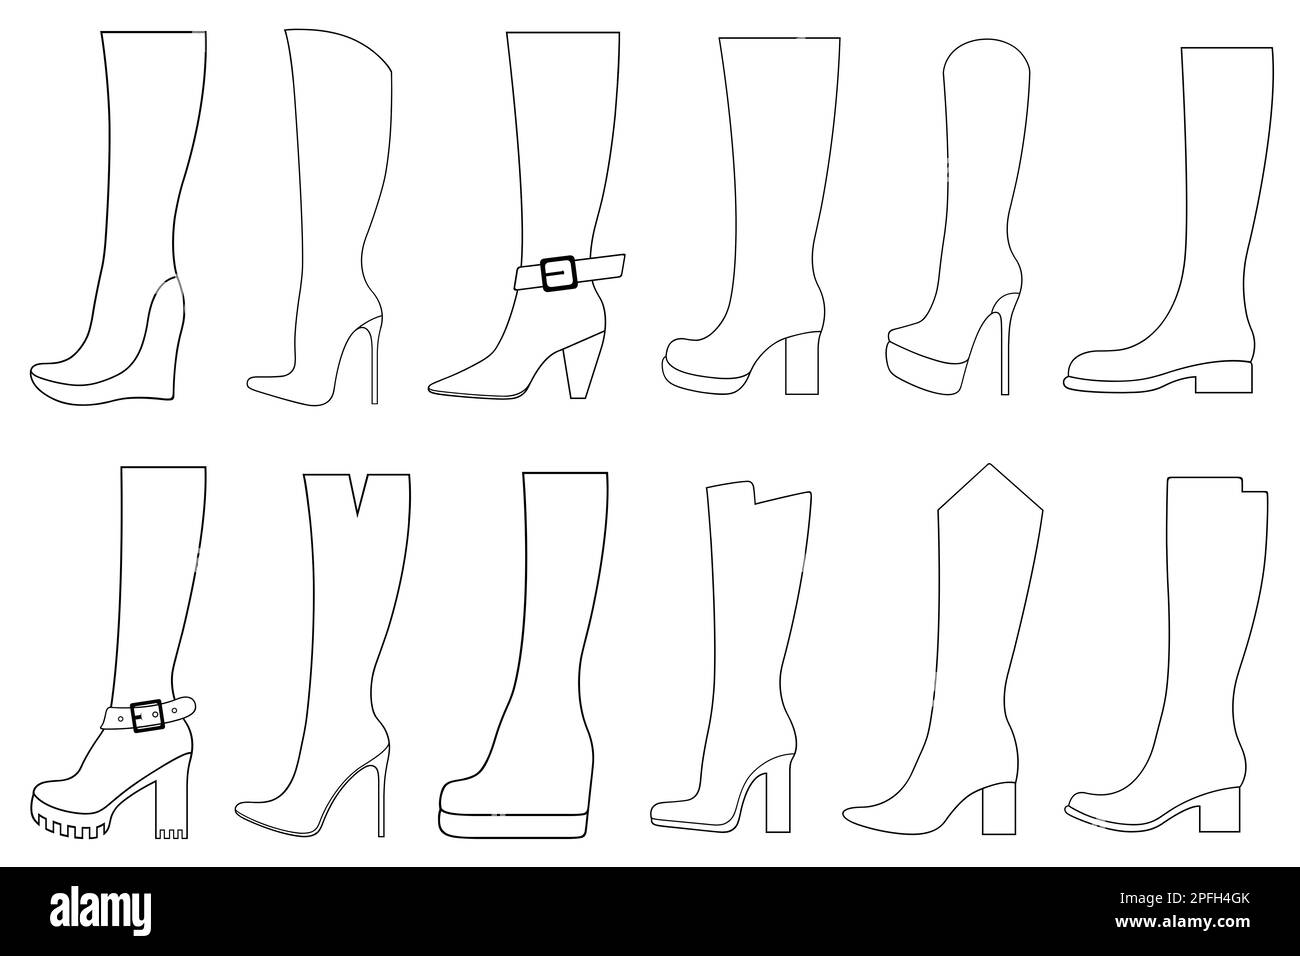 Illustration of different boots isolated on white Stock Photo